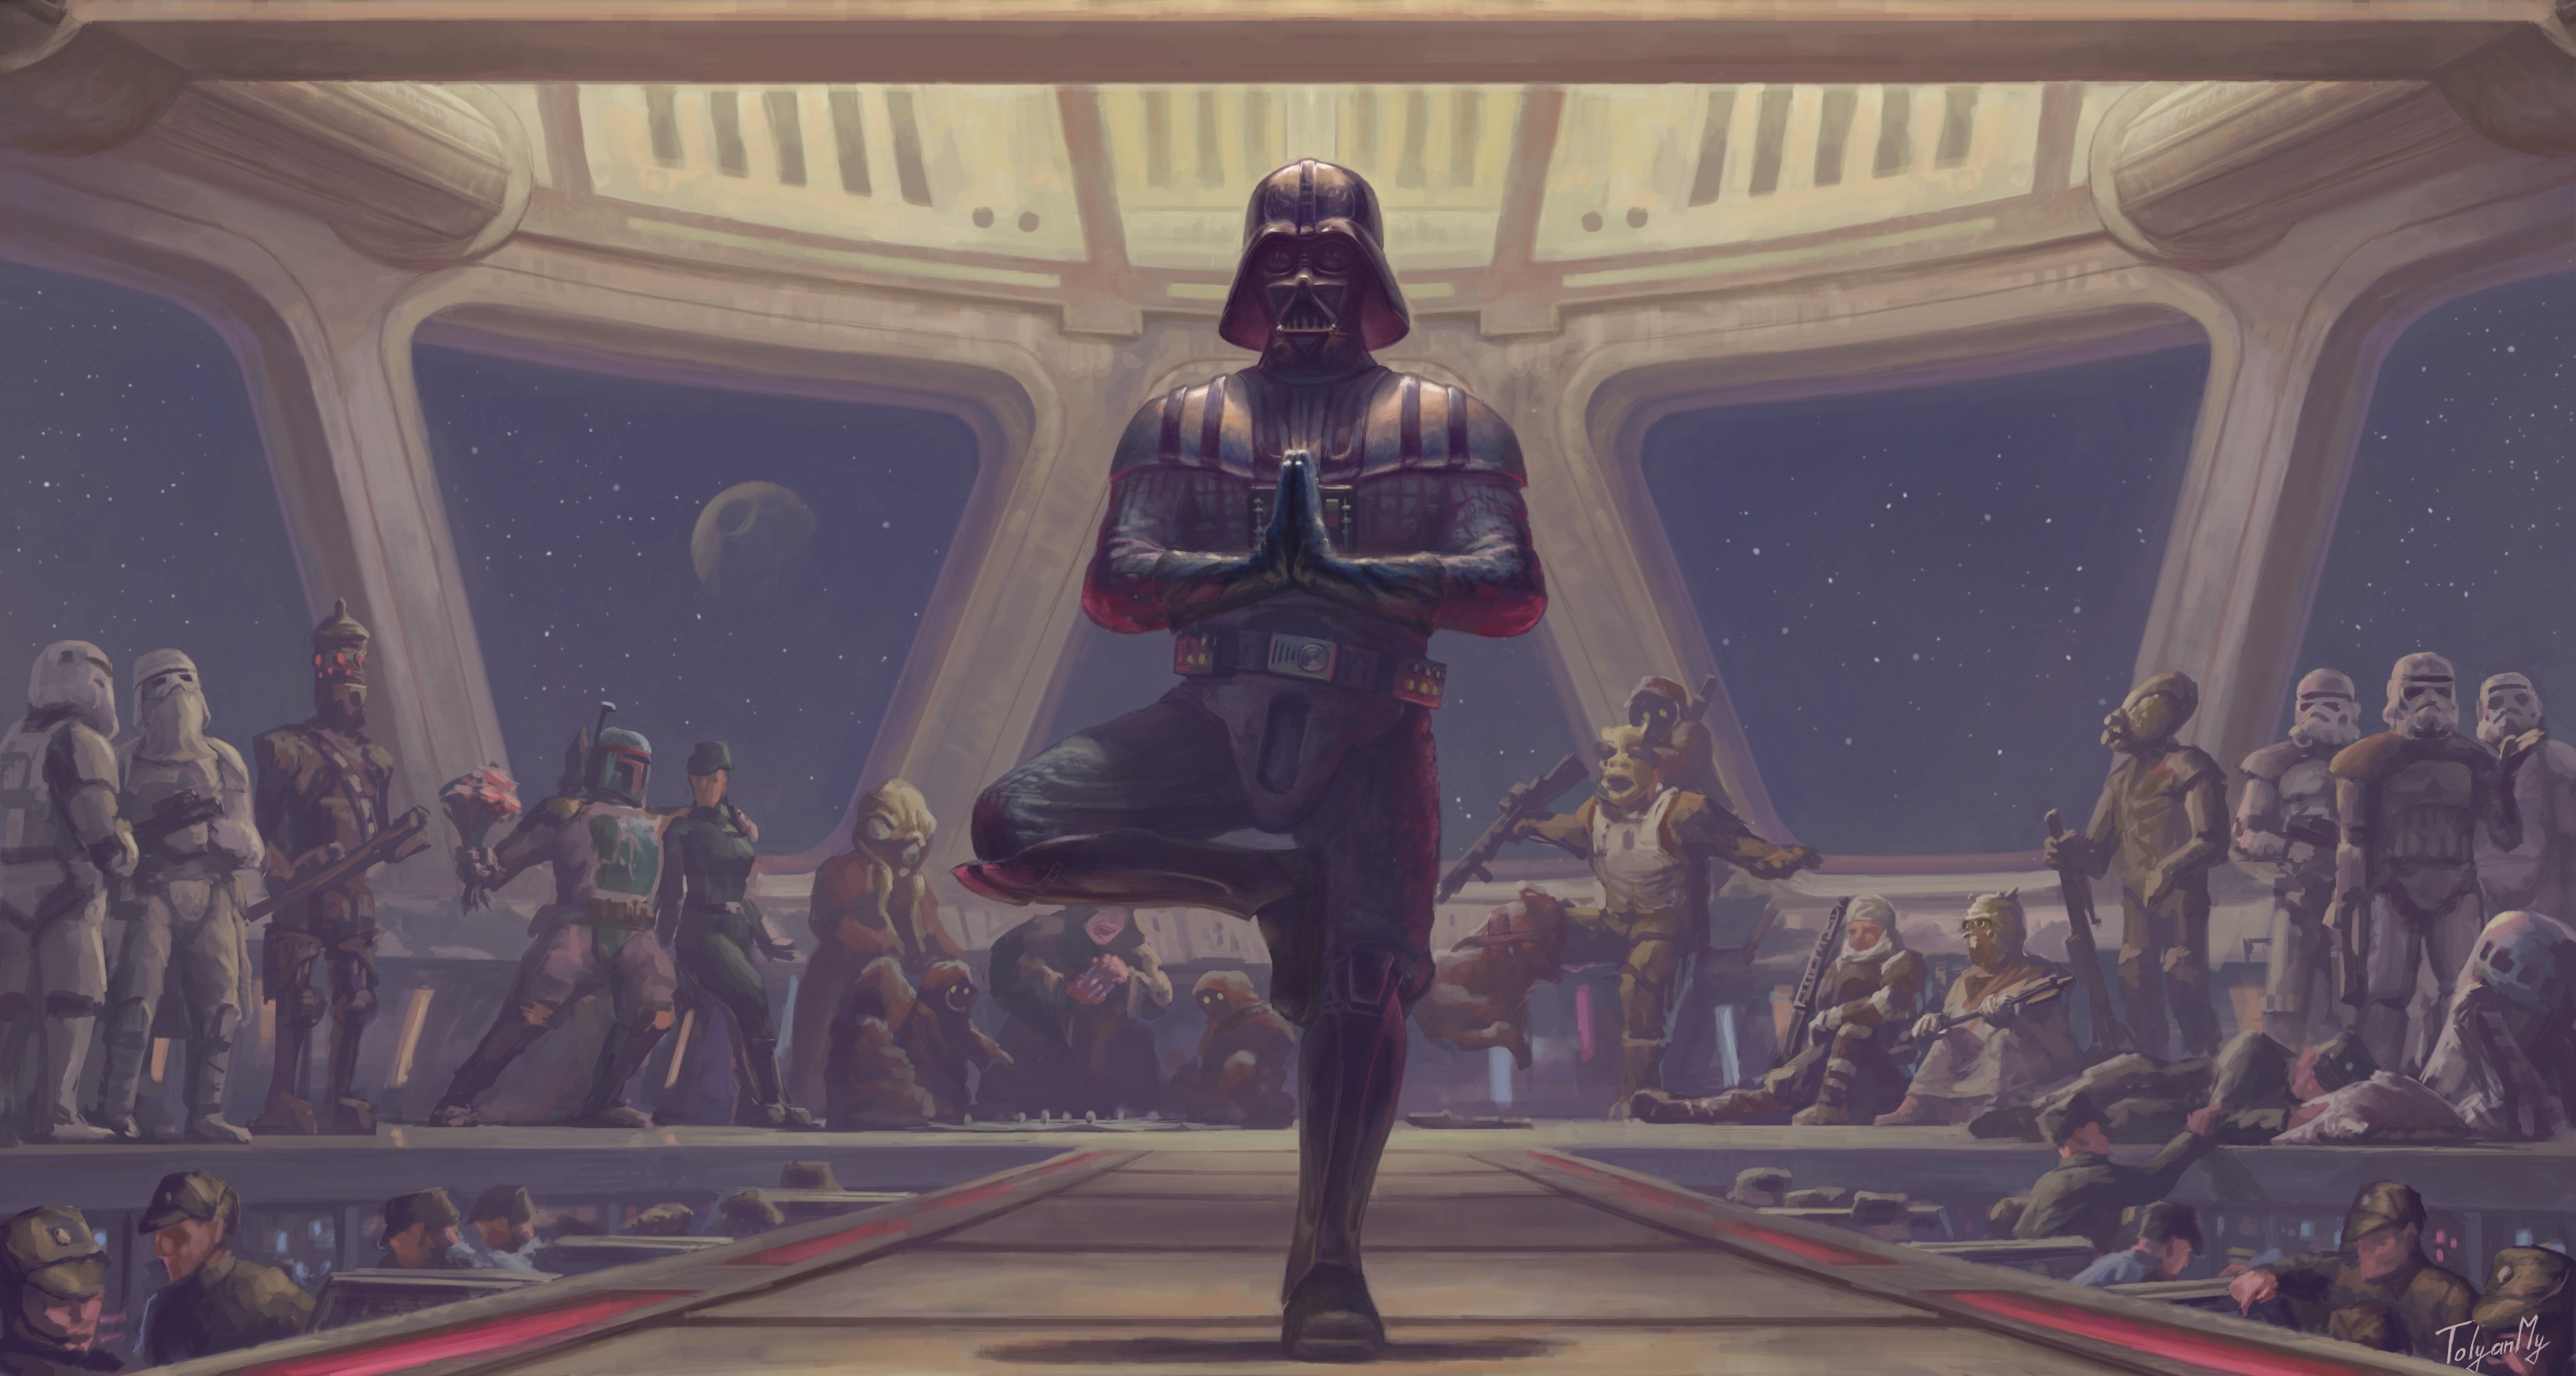 General 3743x2000 space Star Wars humor Star Wars Humor yoga pose standing on one leg Star Wars Villains science fiction Sith Darth Vader